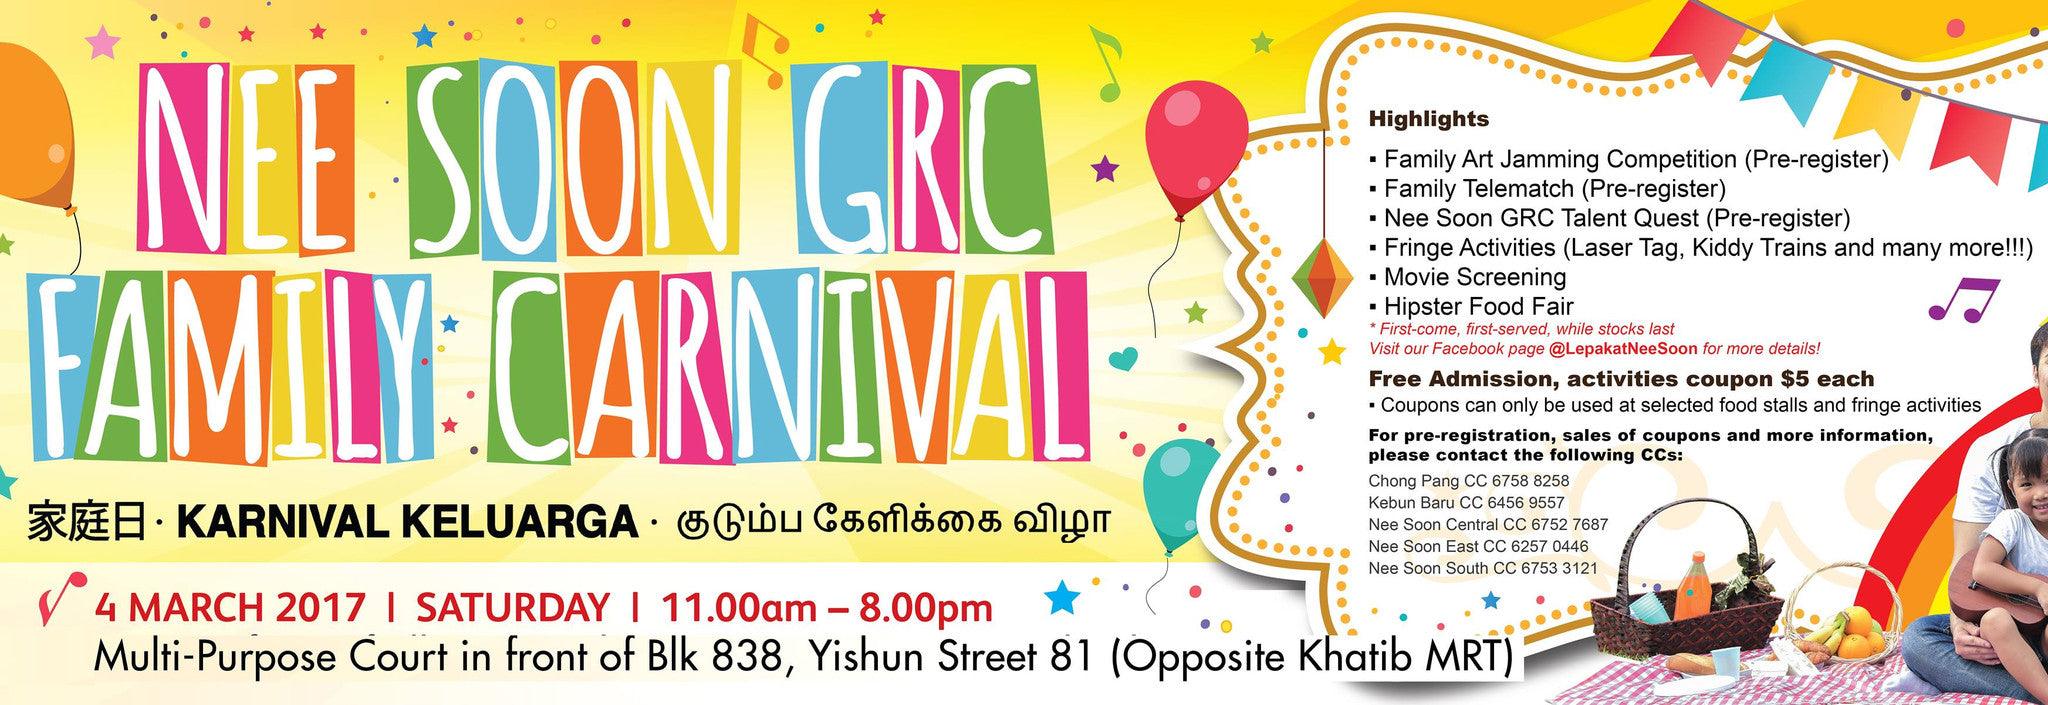 Things to do this Weekend: Free Art Jamming @ Nee Soon GRC Family Carnival!